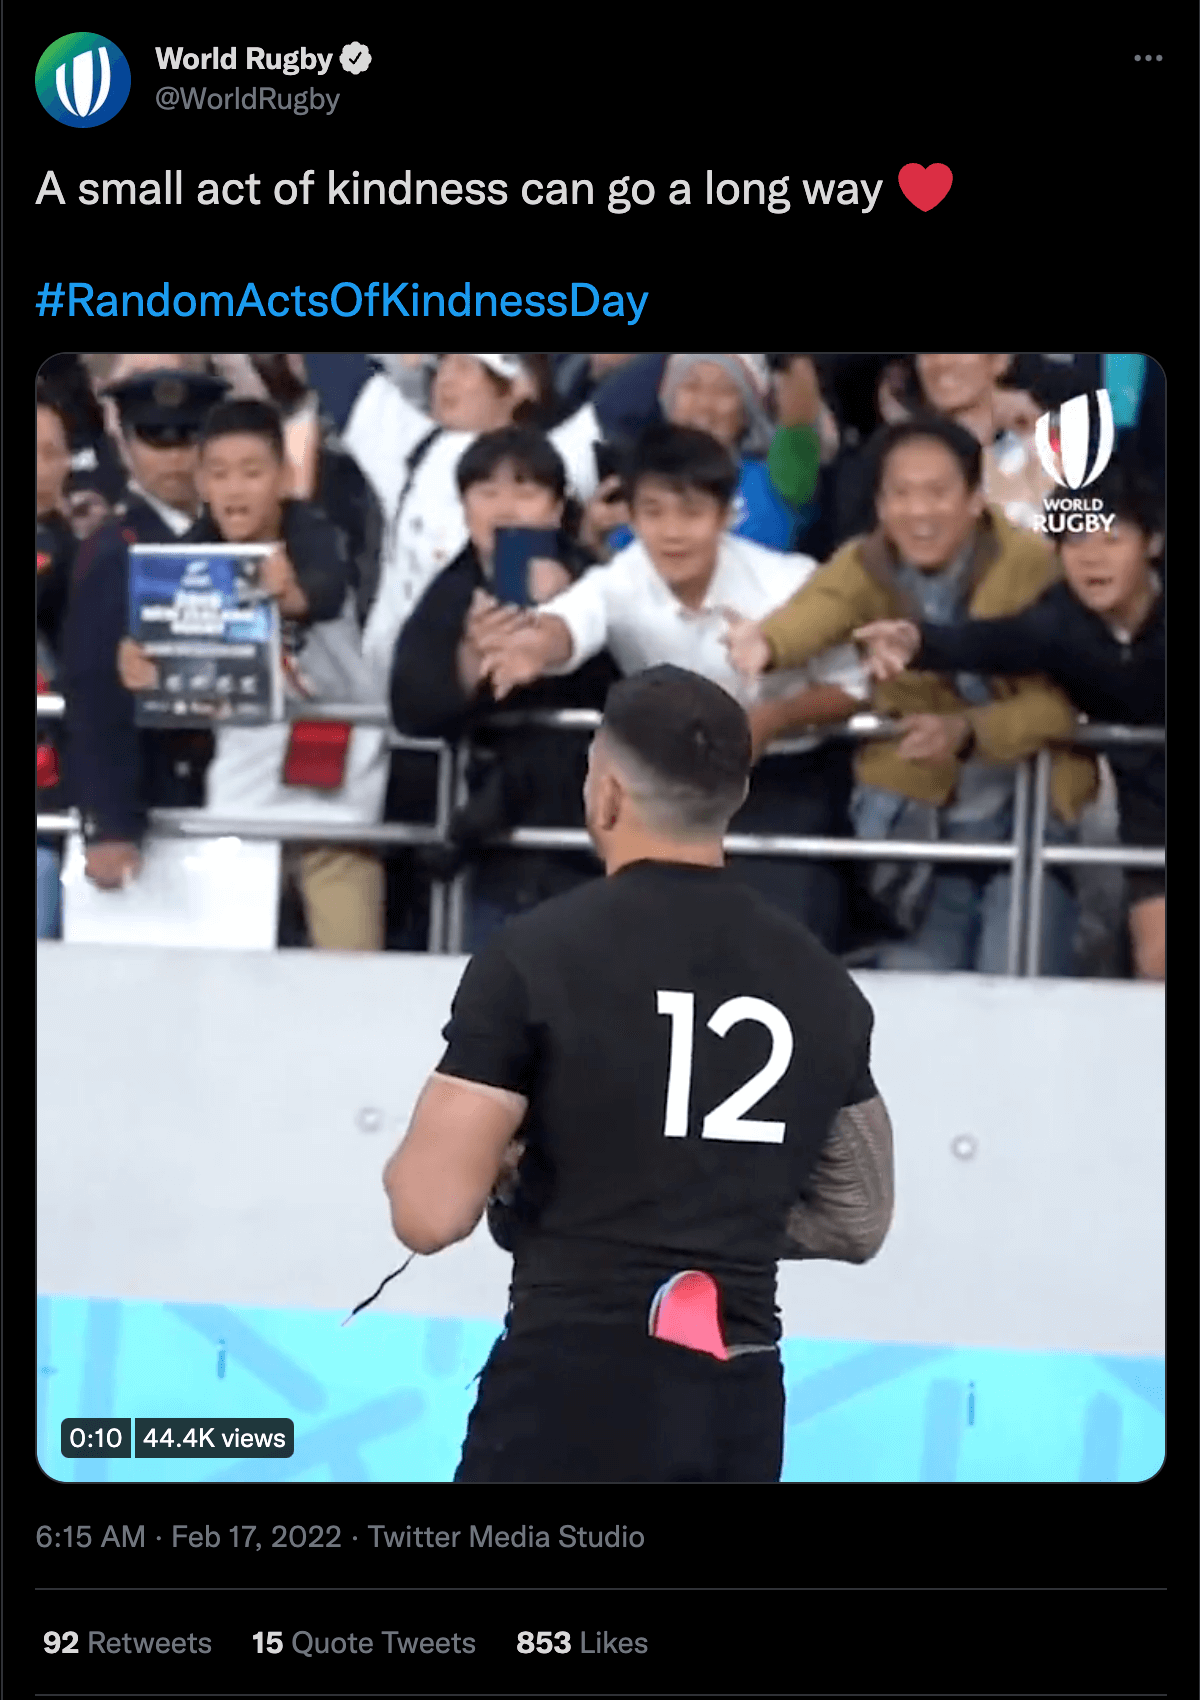 A tweet from World Rugby. The video shows a player with his back to the camera, the caption reads "A small act of kindness can go a long way #RandomActsOfKindnessDay